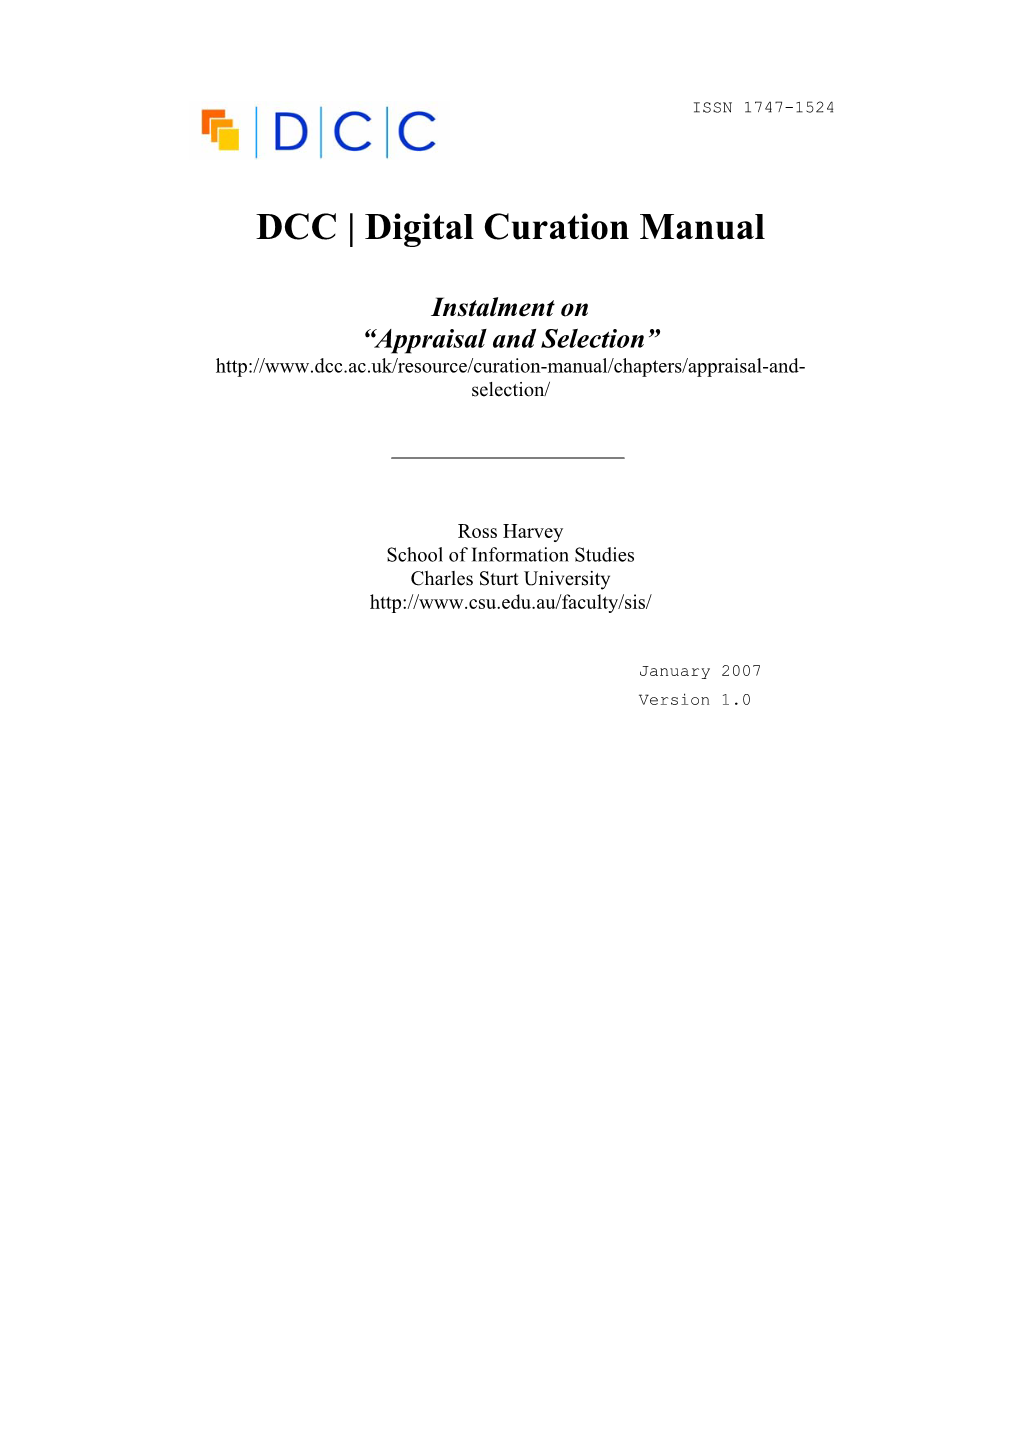 DCC Digital Curation Manual Instalment on Appraisal and Selection